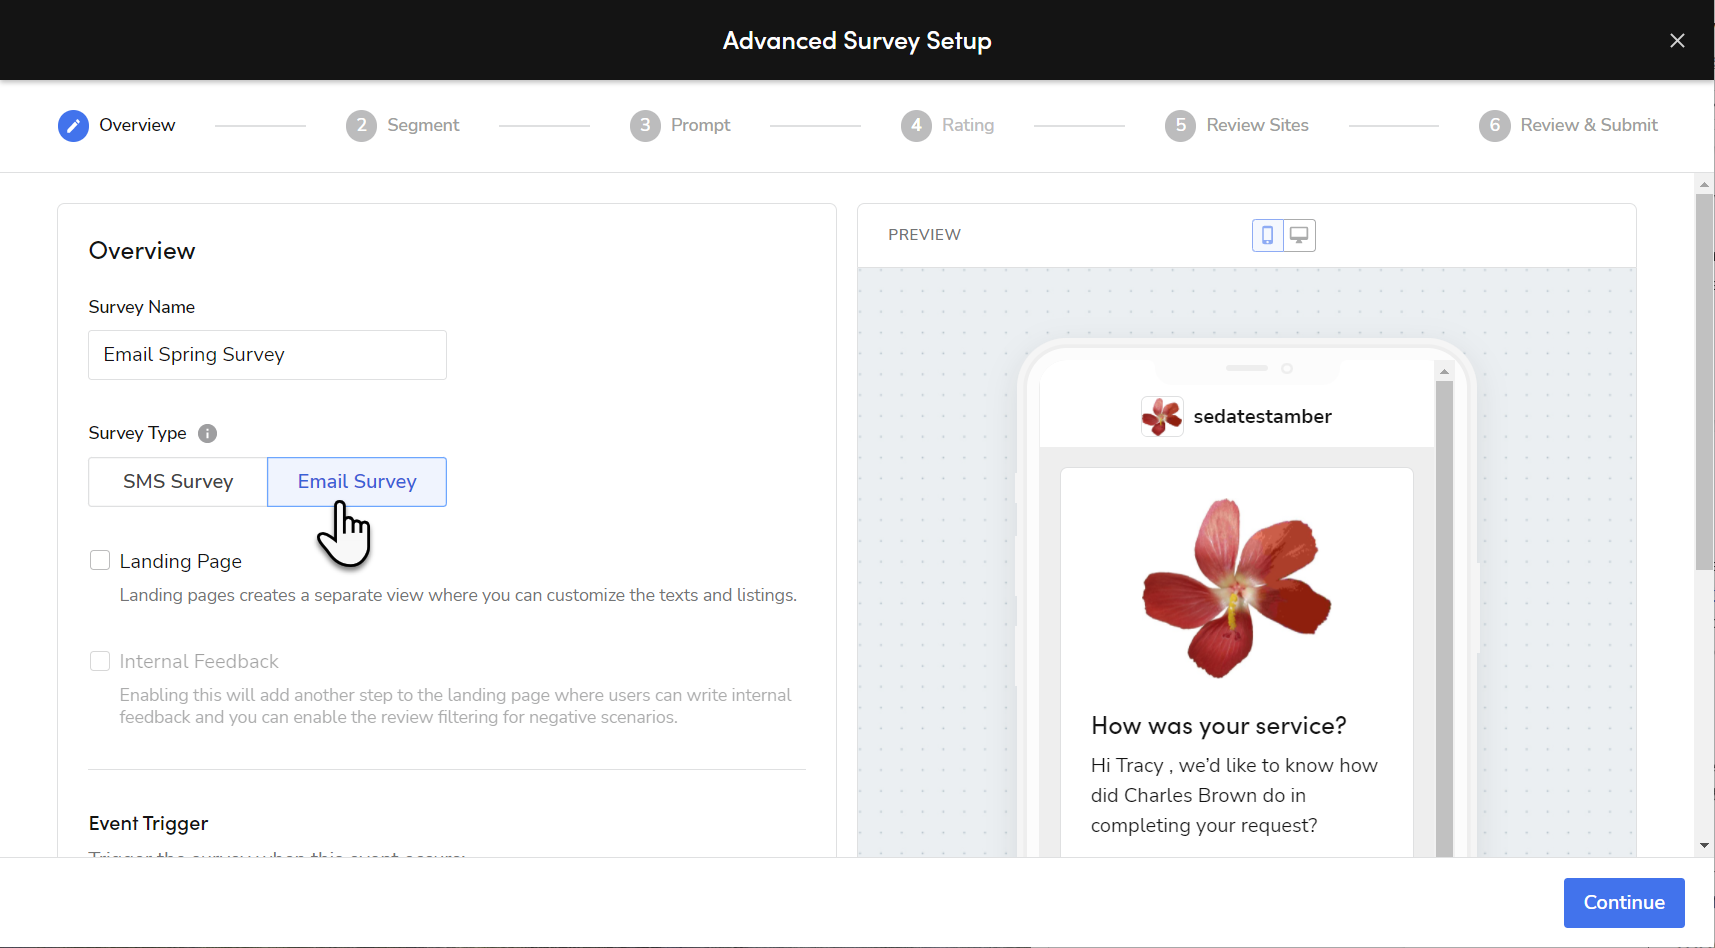 Select Email Survey in Overview